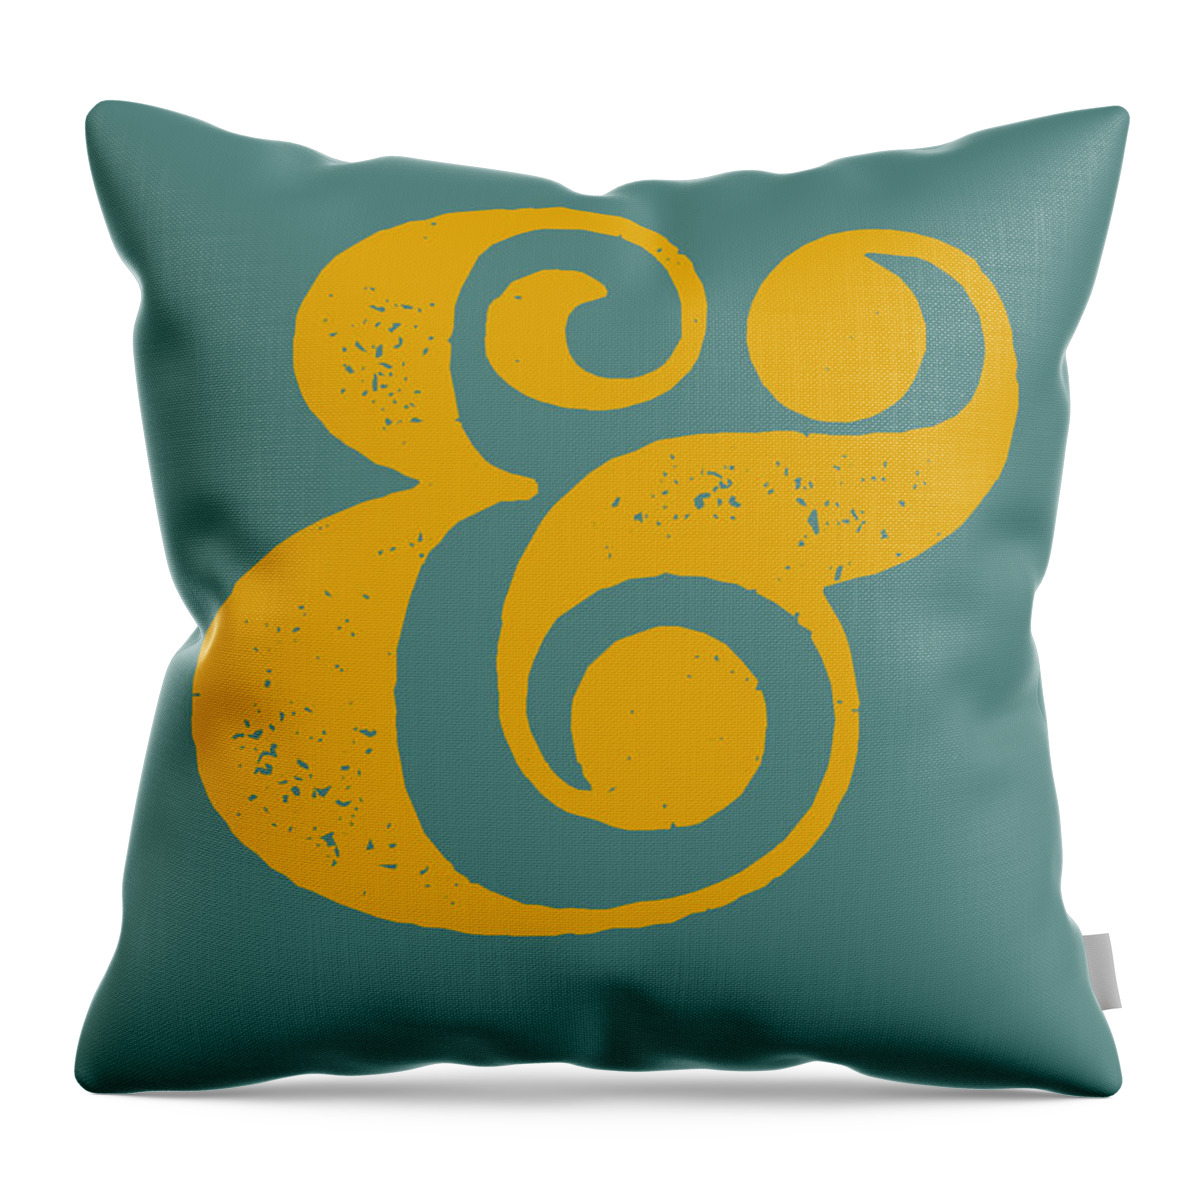 Ampersand Throw Pillow featuring the digital art Ampersand Poster Blue and Yellow by Naxart Studio